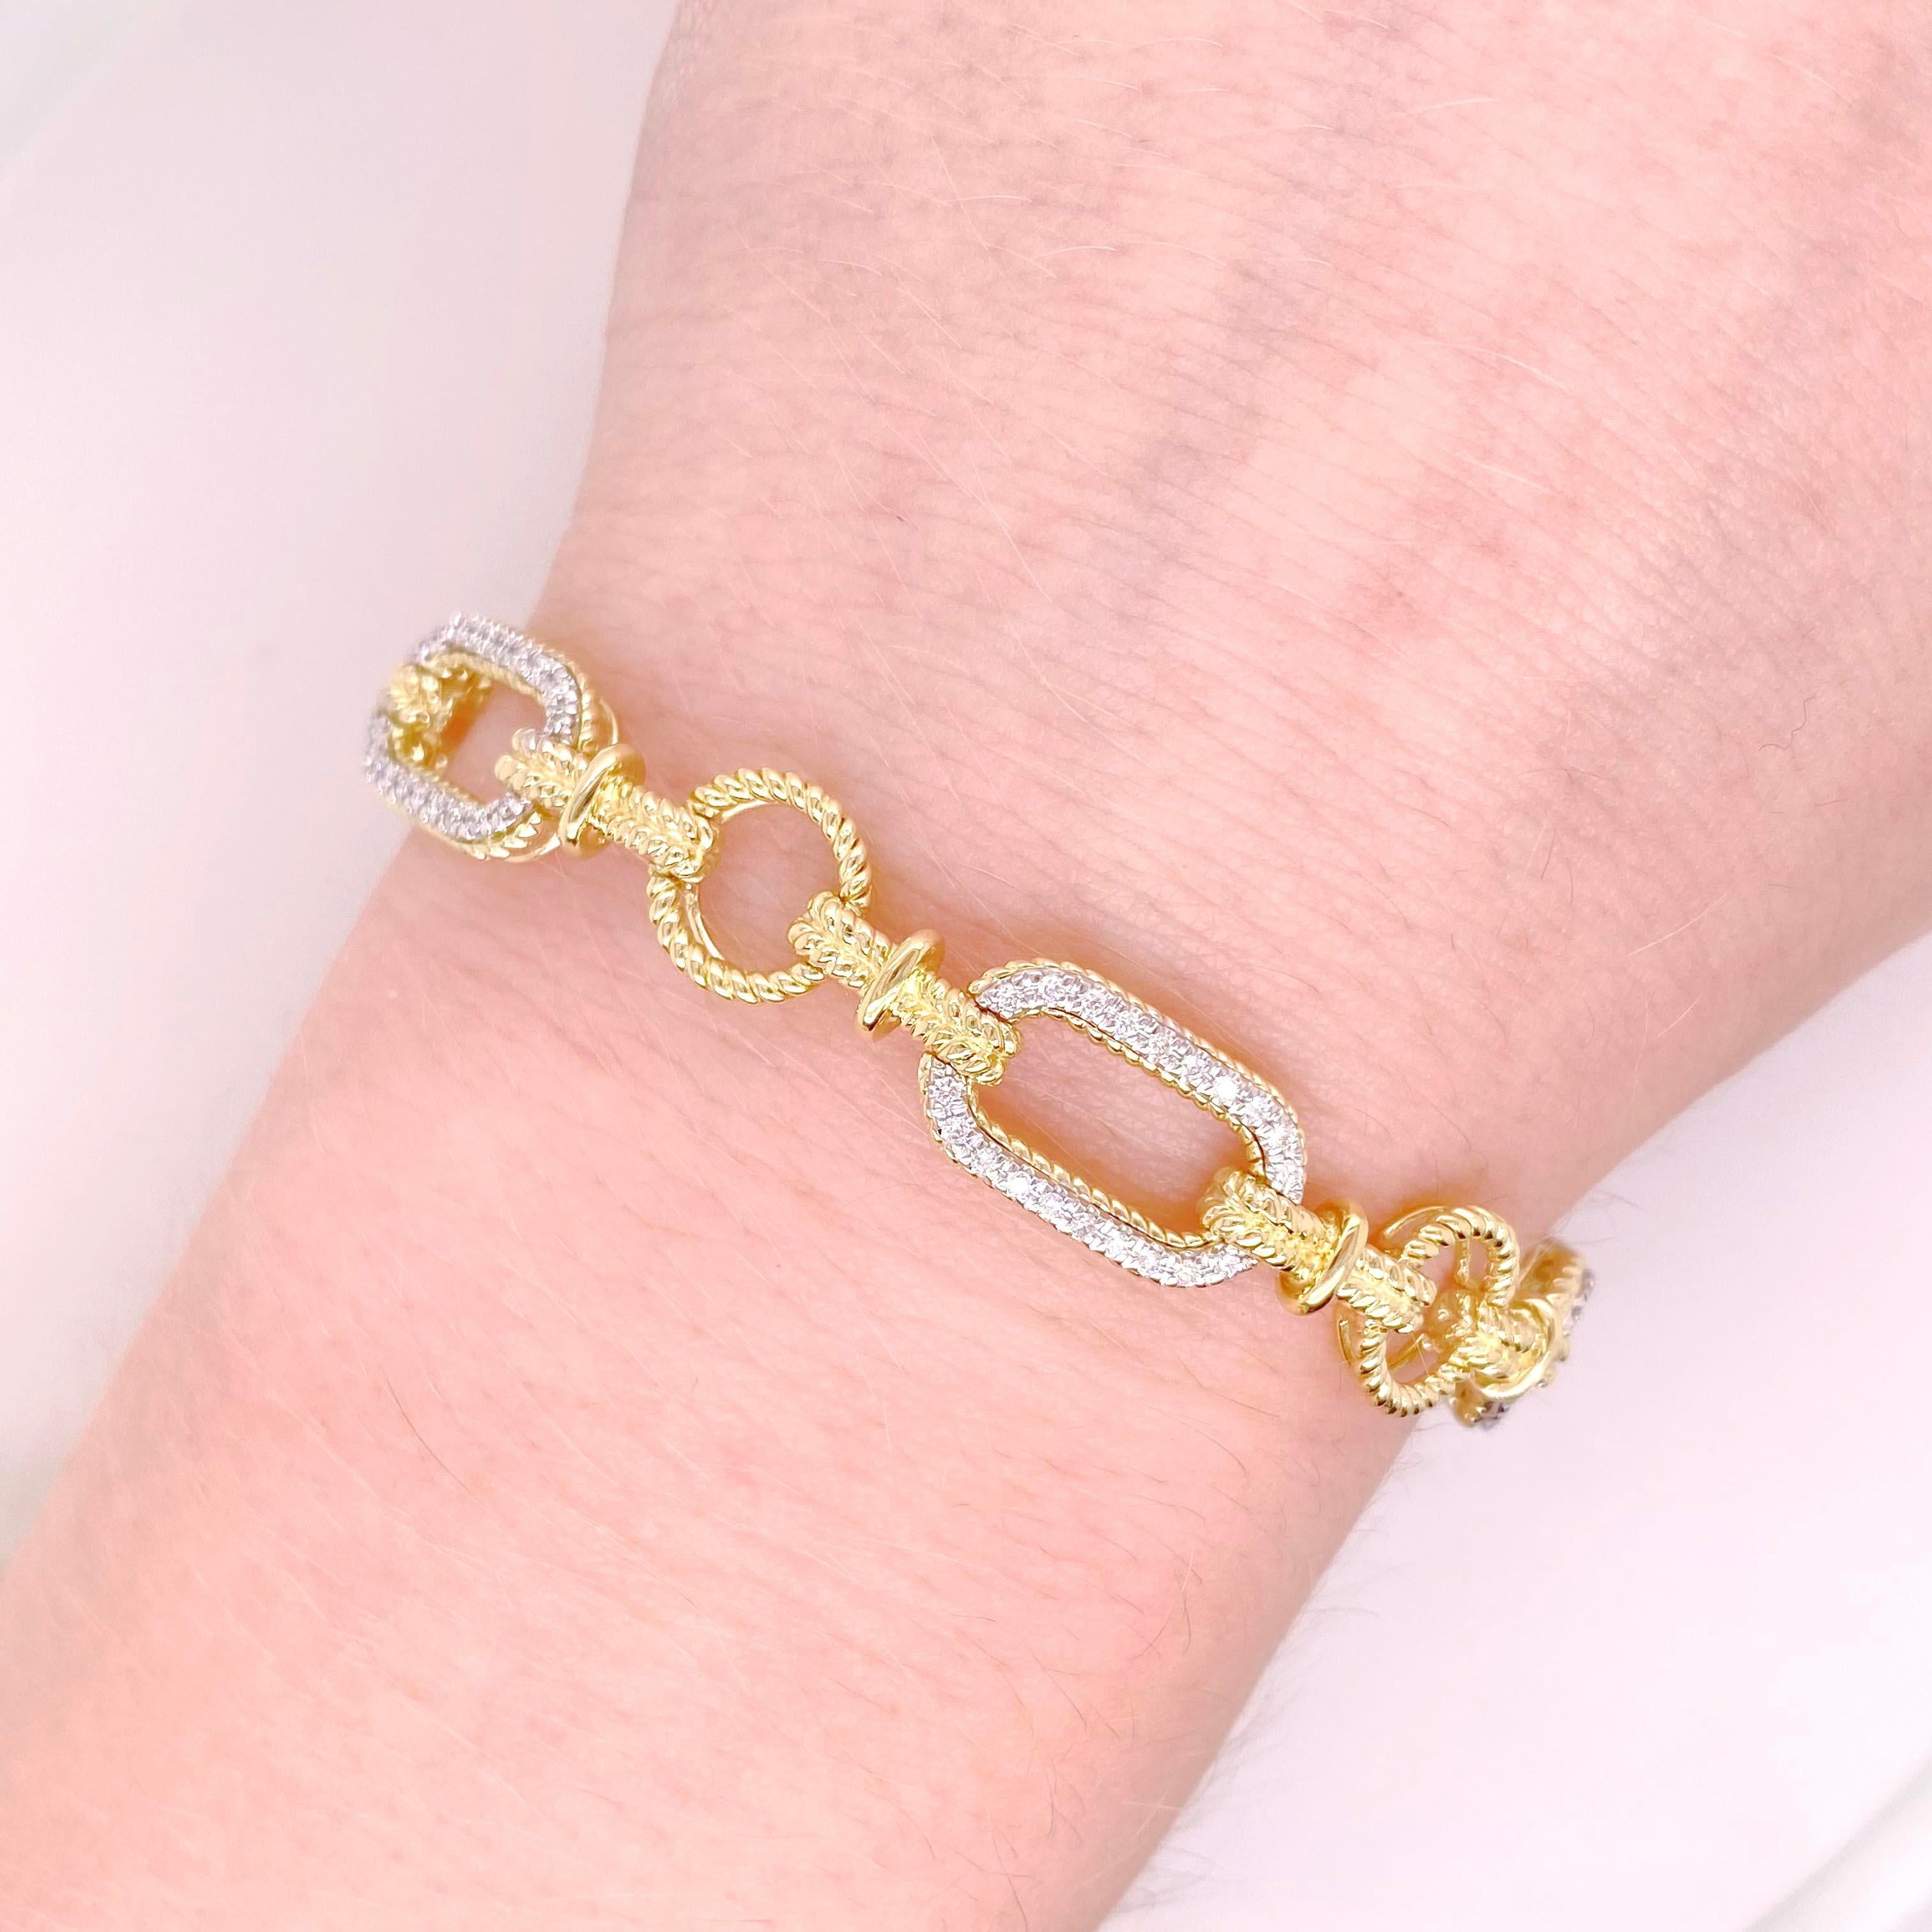 This bracelet is the perfect additional to any fine jewelry collection! The design has pave diamond links alternating with beaded gold links, giving the bracelet a versatile and unique look. The diamonds are bright white, adding contrast next to the